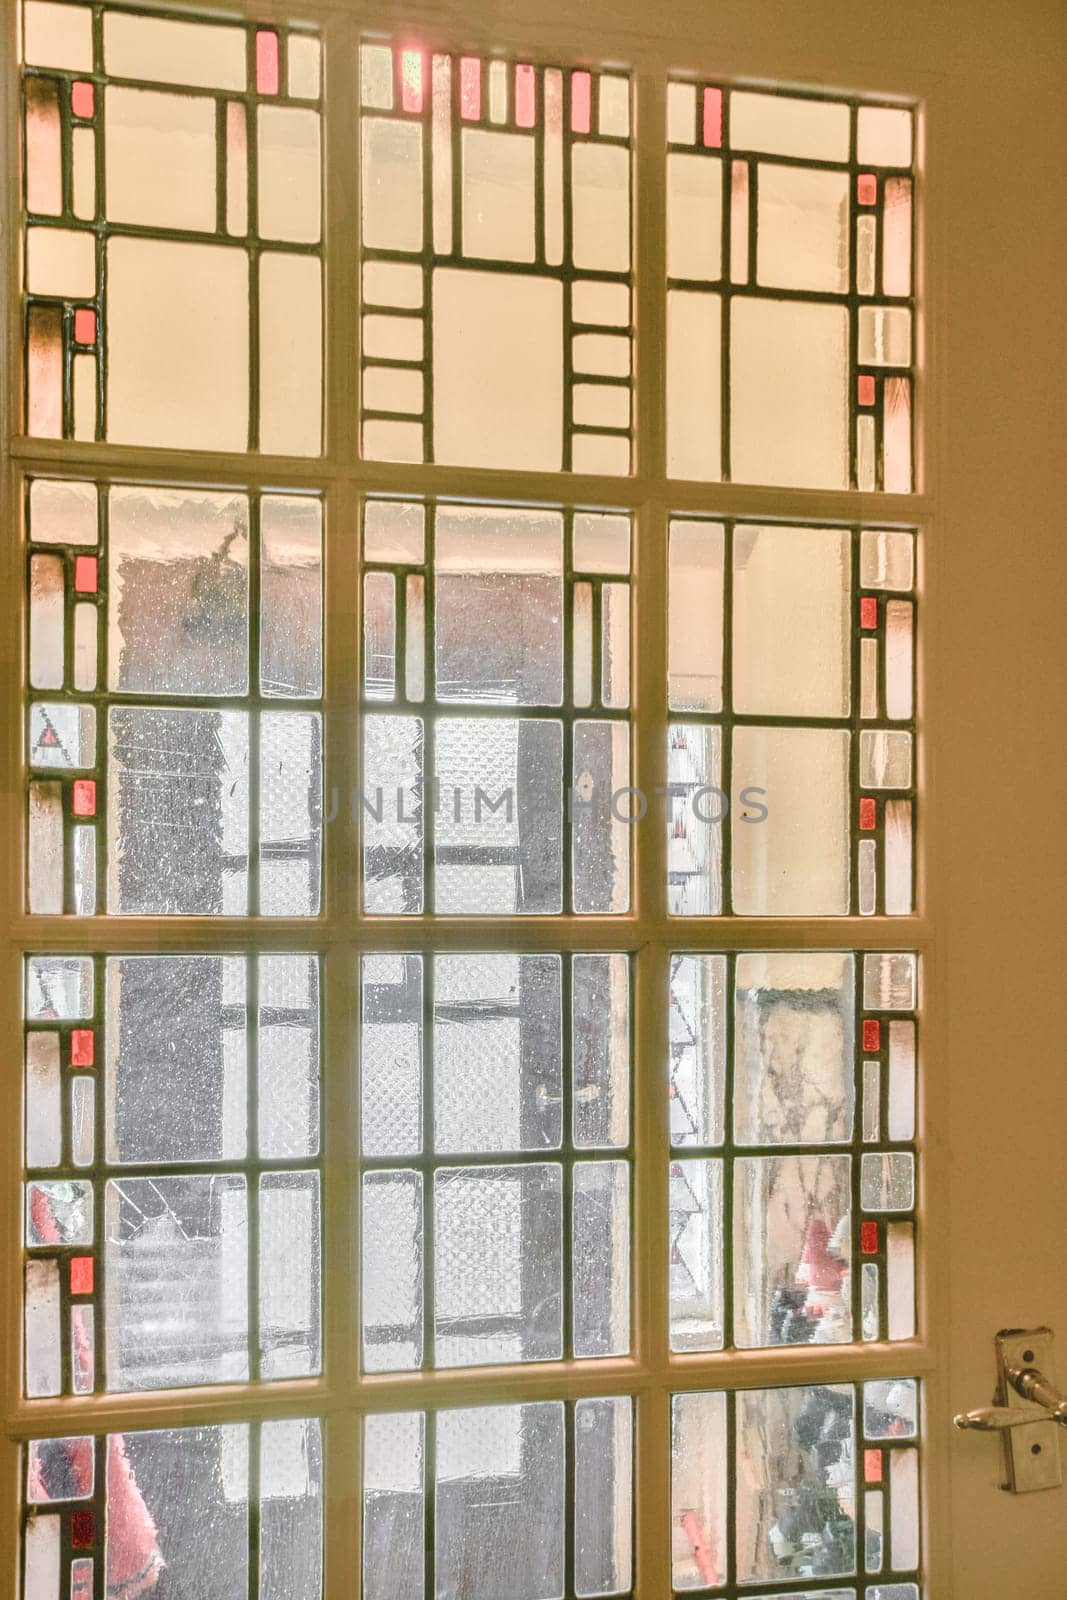 a view of a window from inside of a church by casamedia